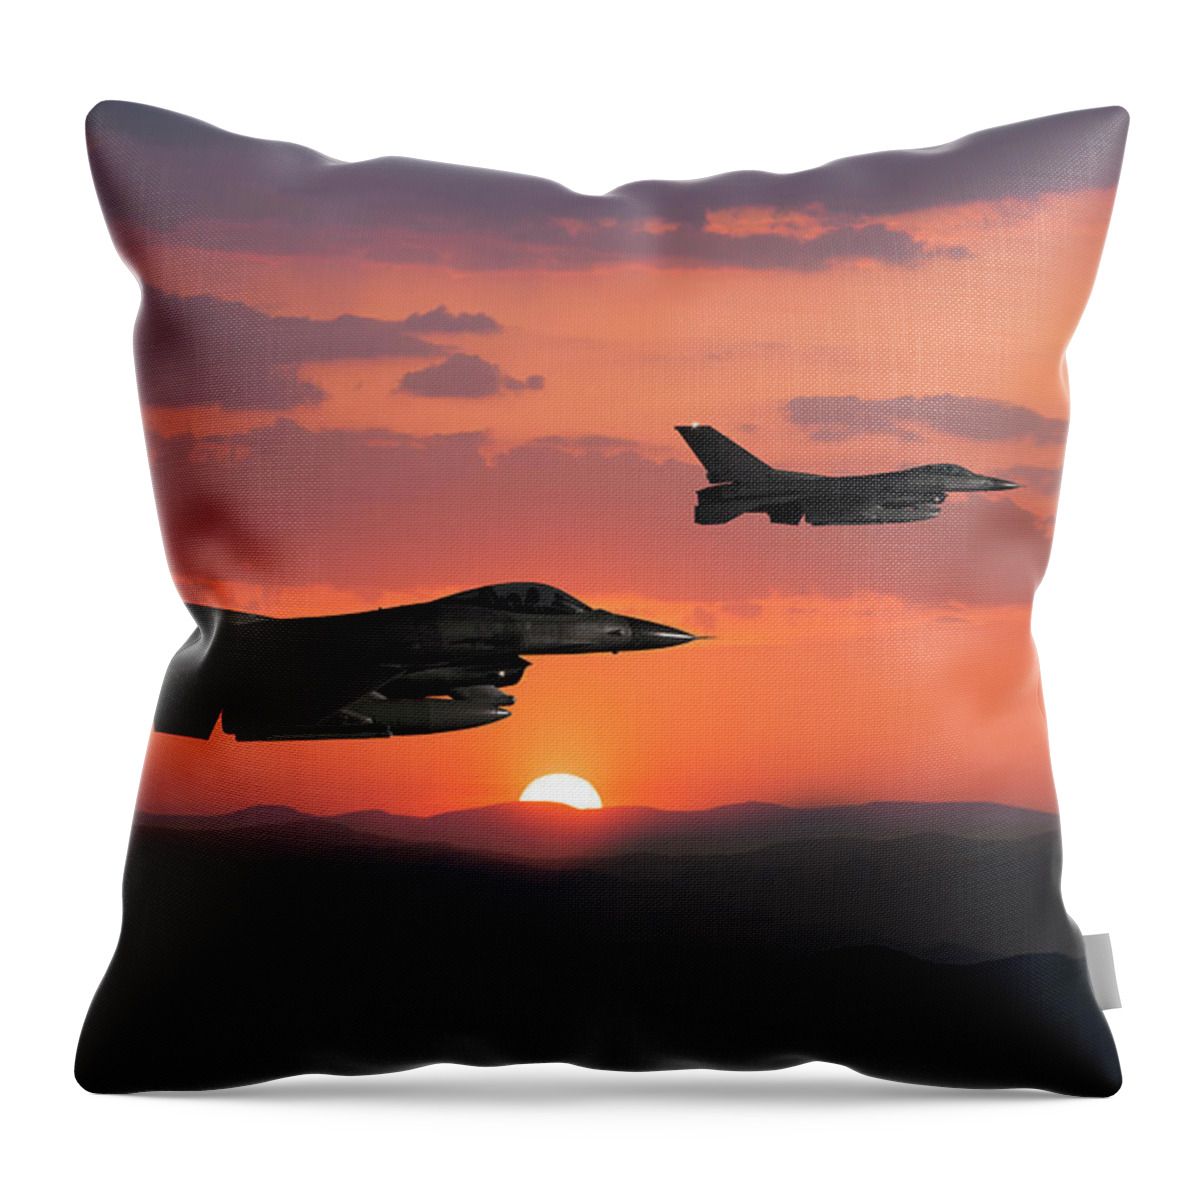 Orange Color Throw Pillow featuring the photograph Fıghter Jet In Flight At Sunset by Guvendemir